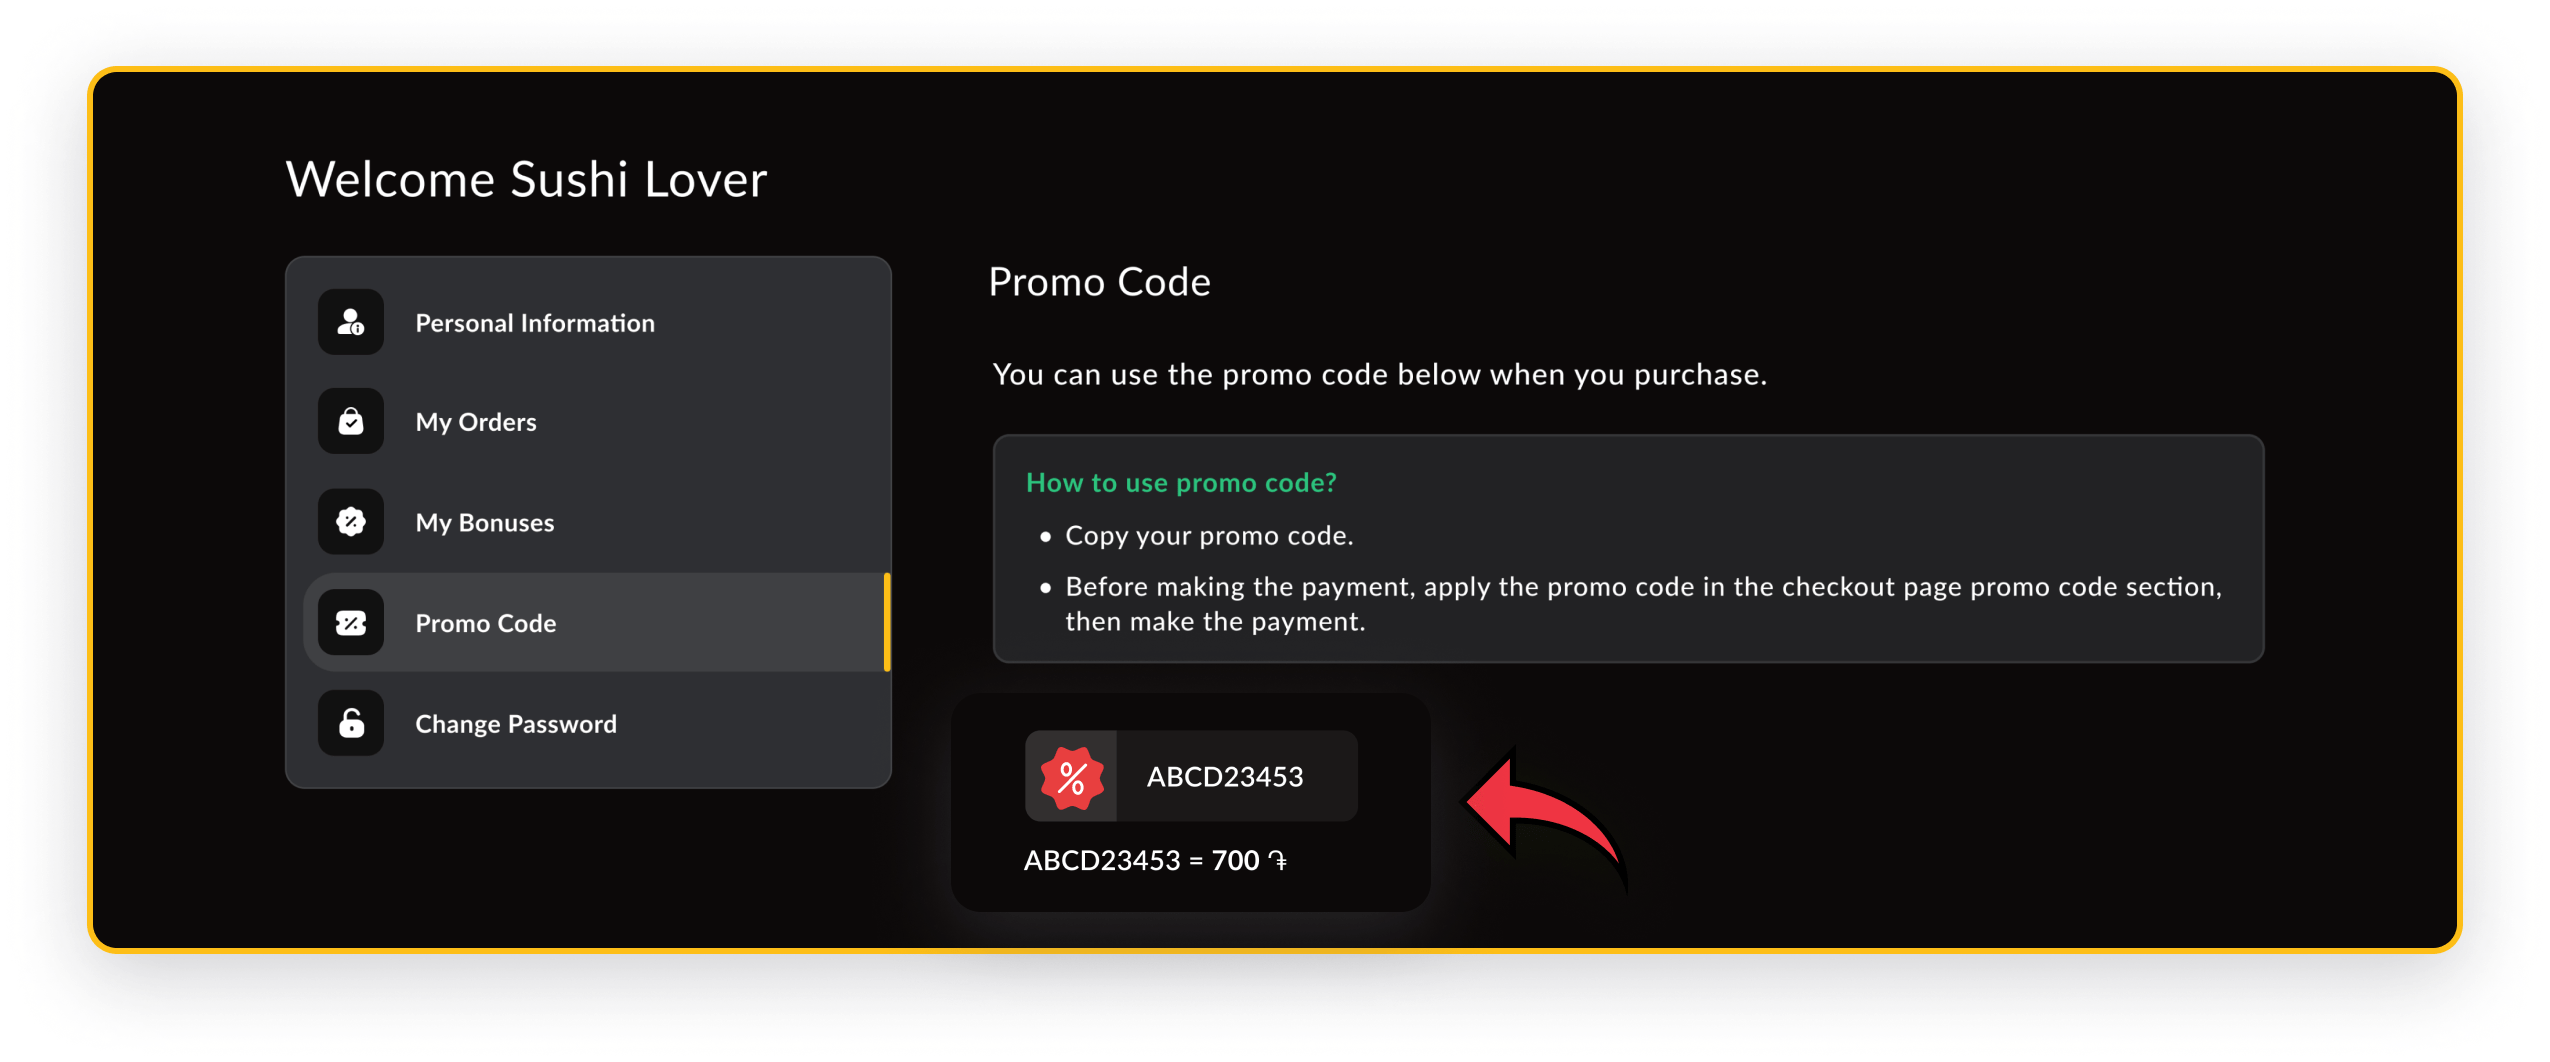 How to get and use a promo code 1